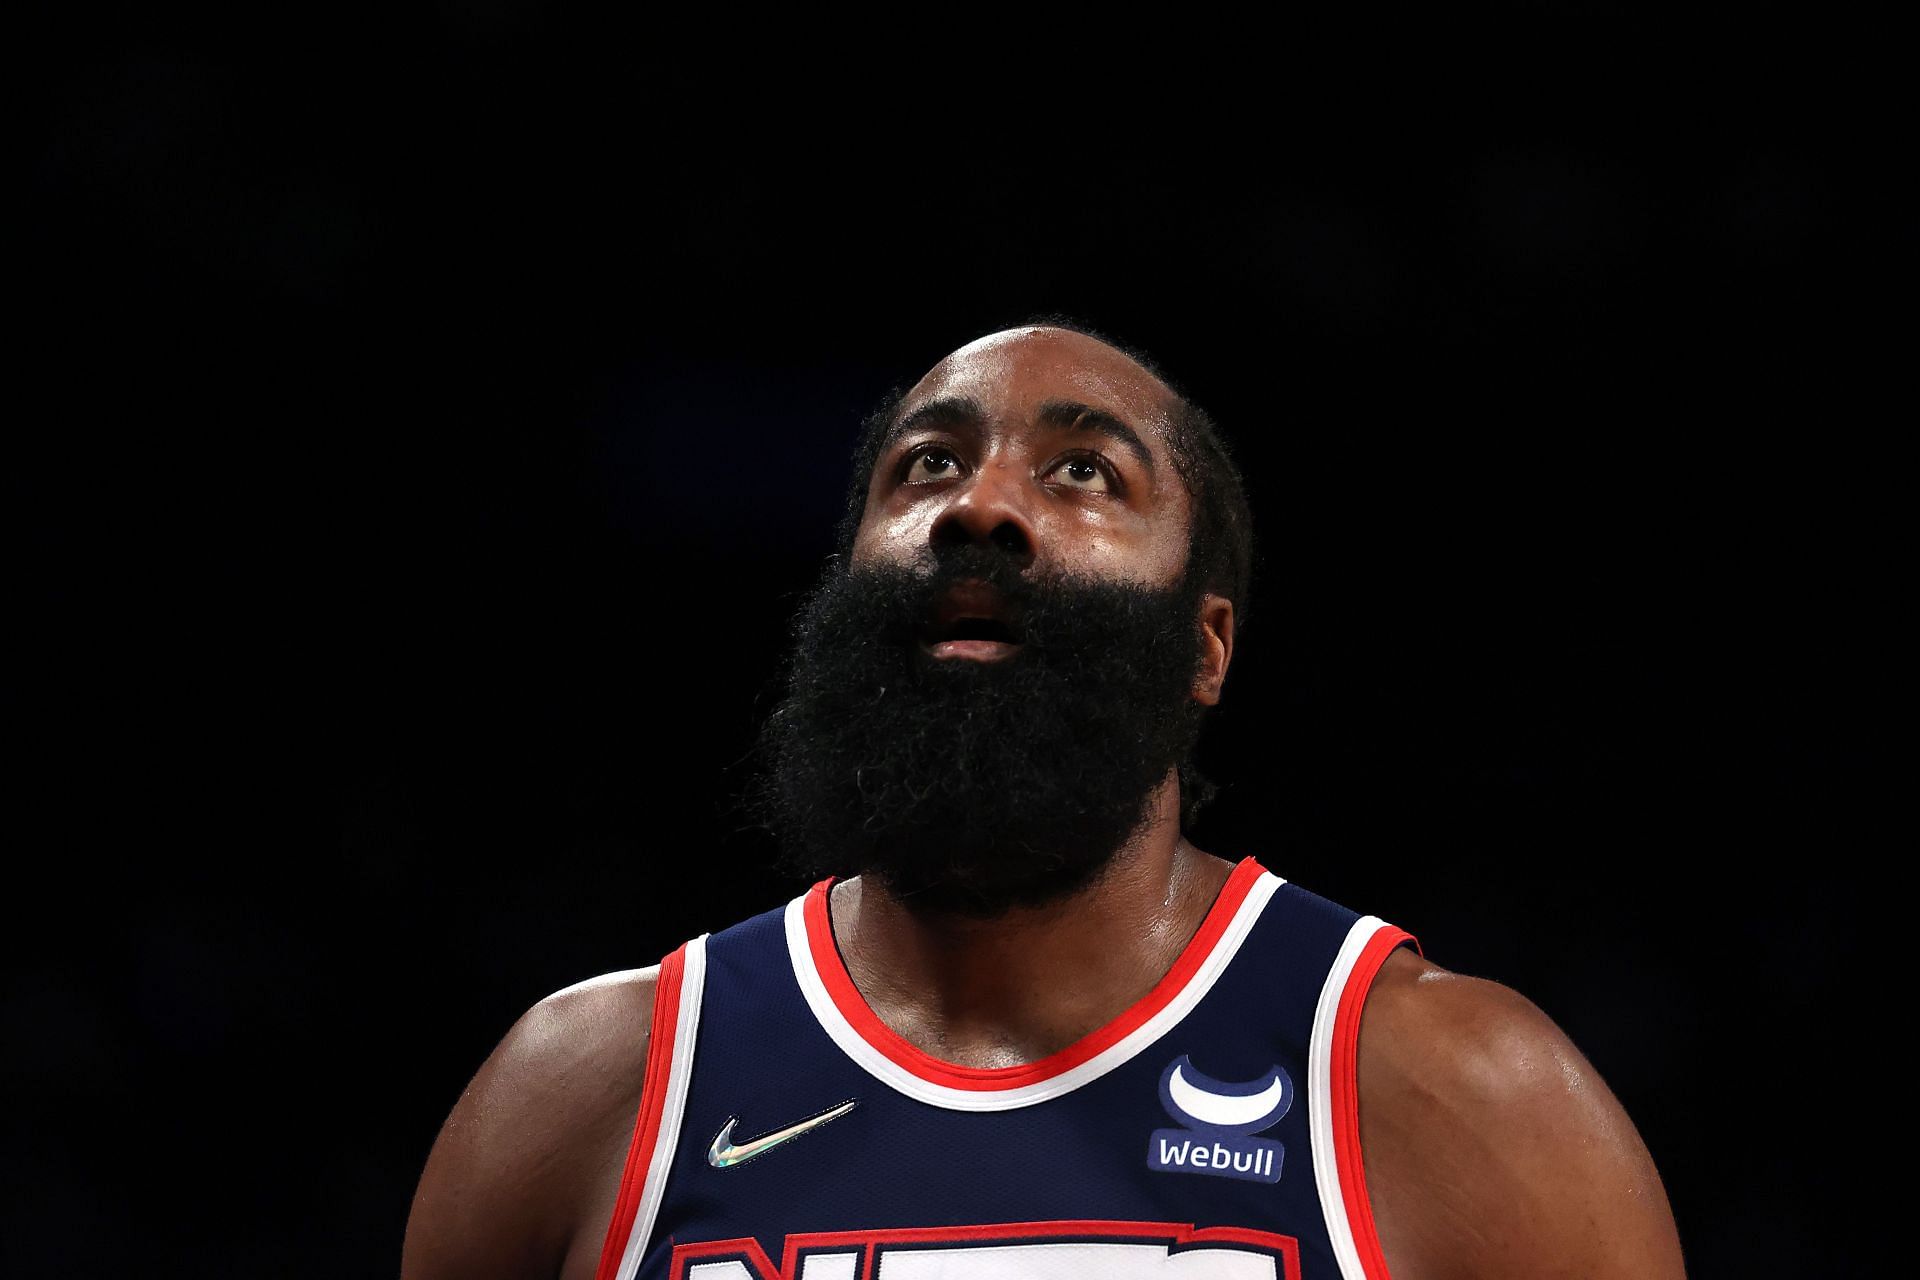 James Harden #13 of the Brooklyn Nets